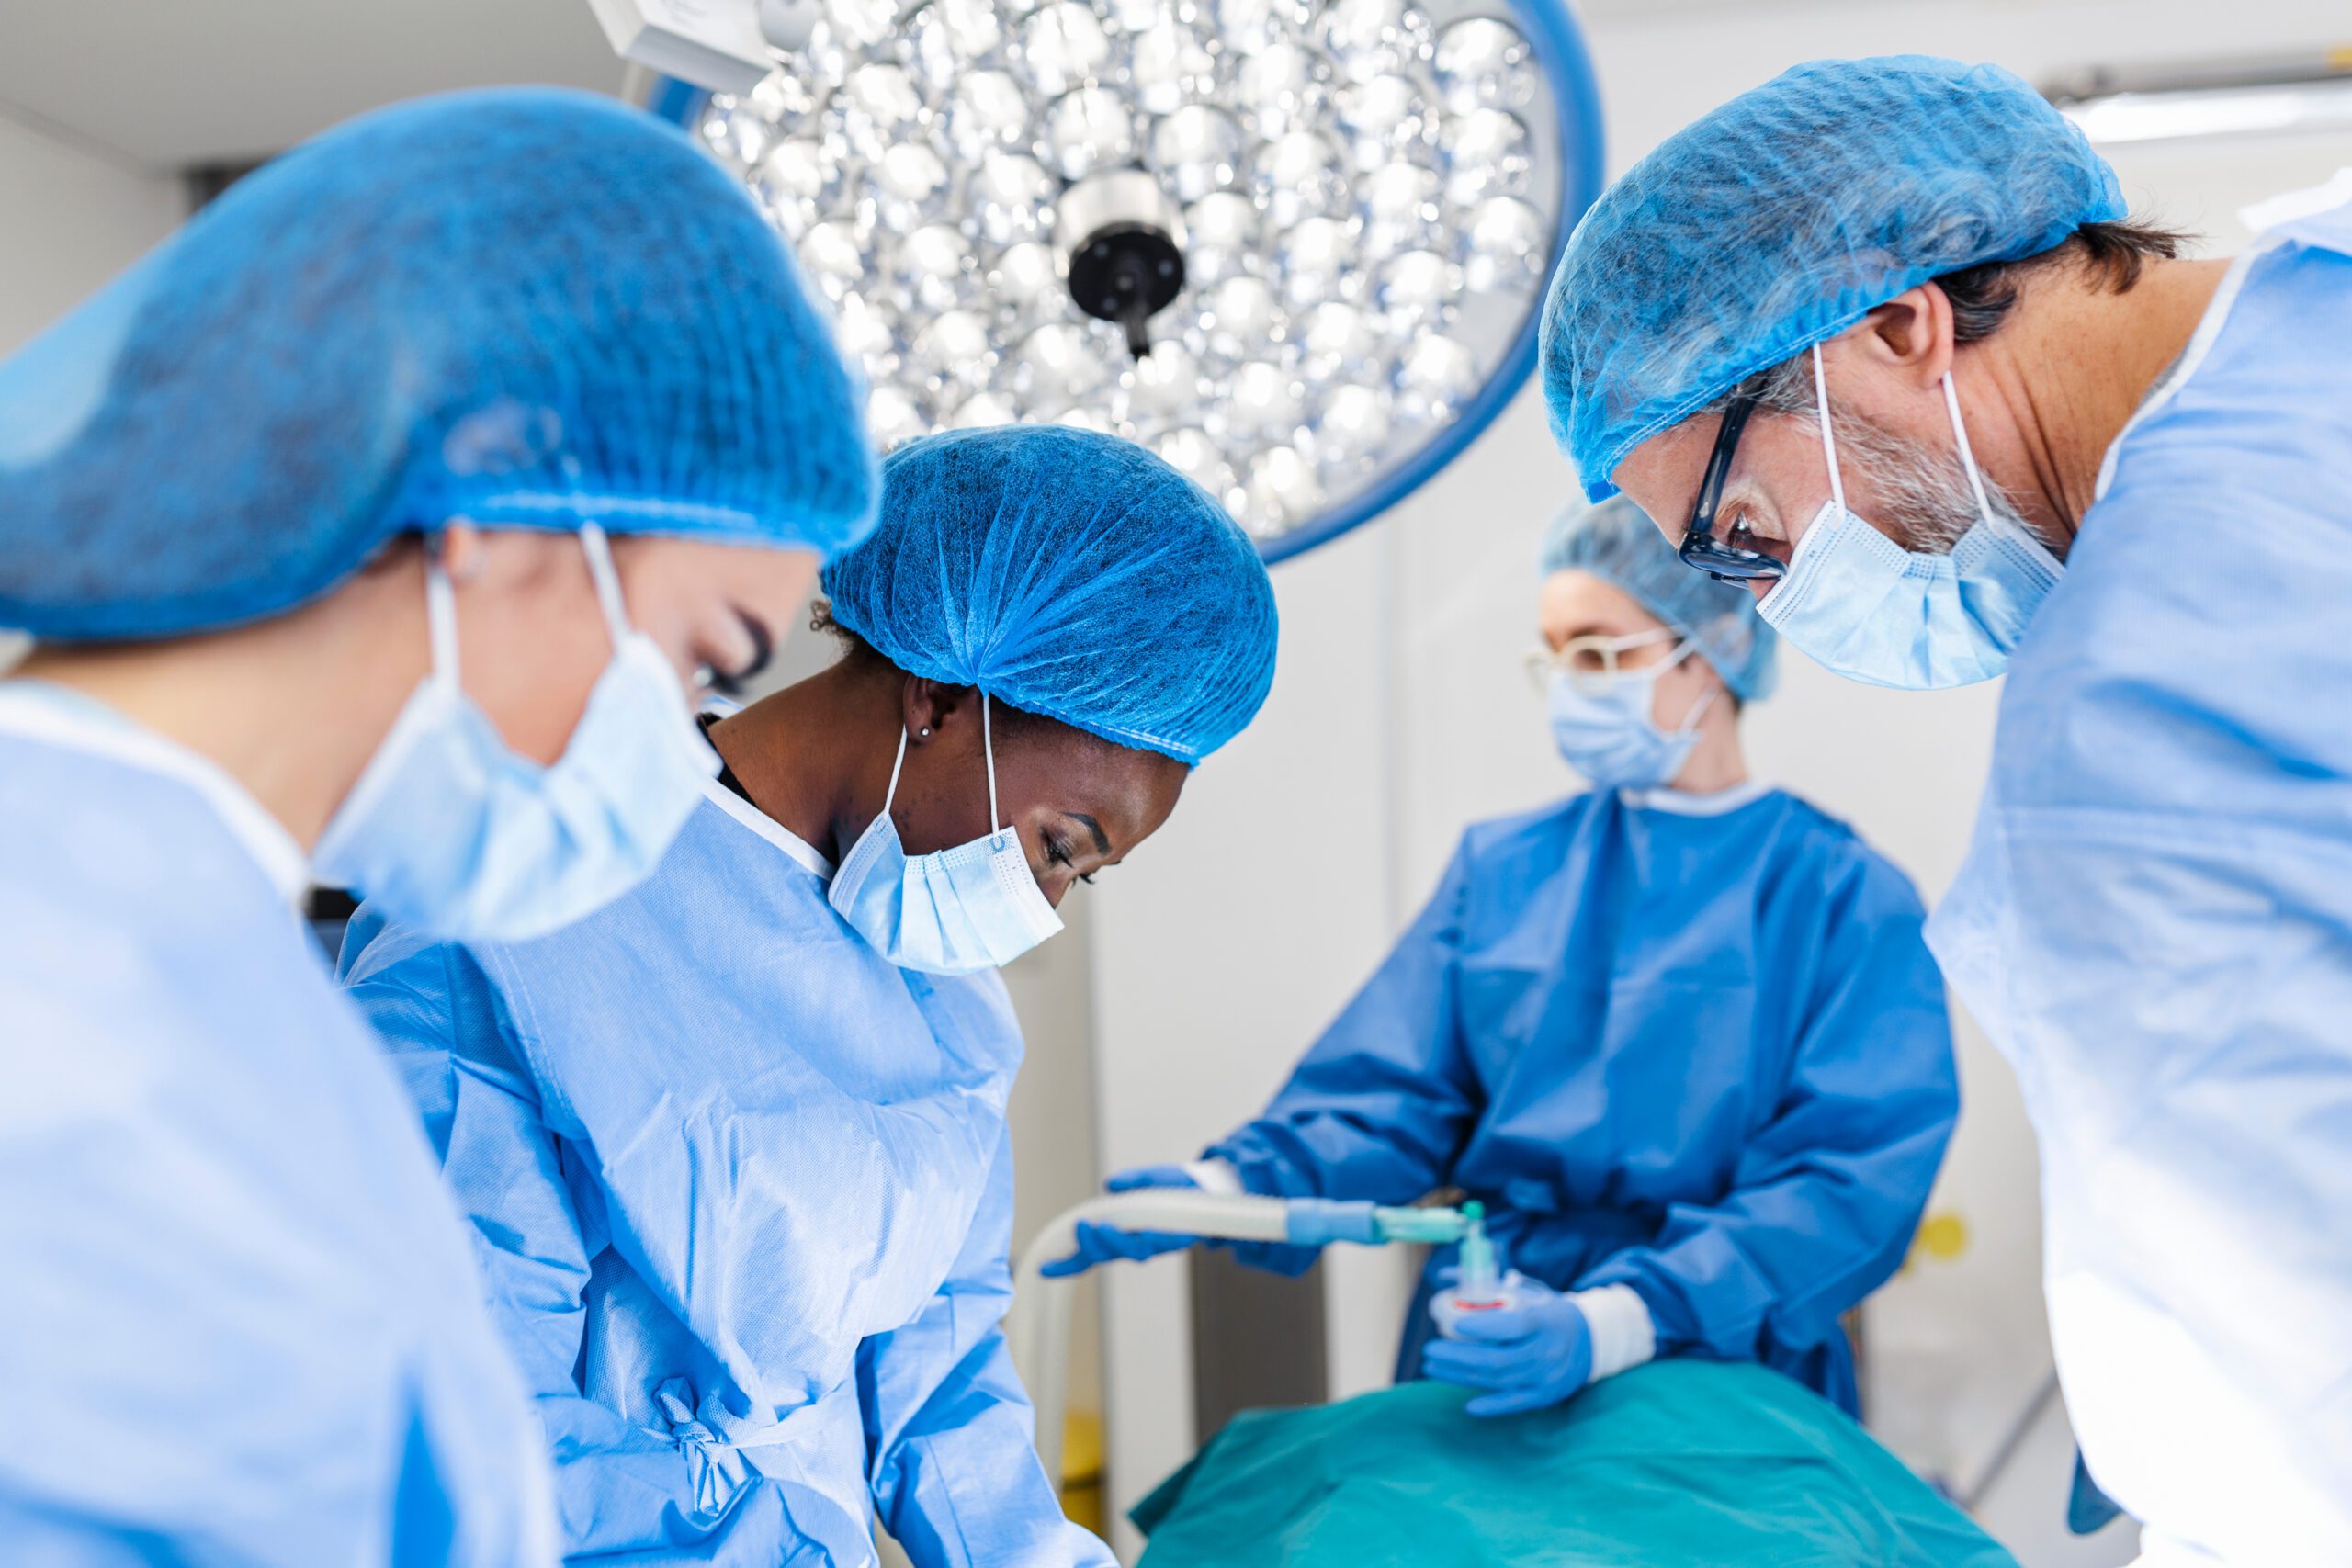 Operating room with a surgeon and nurses.